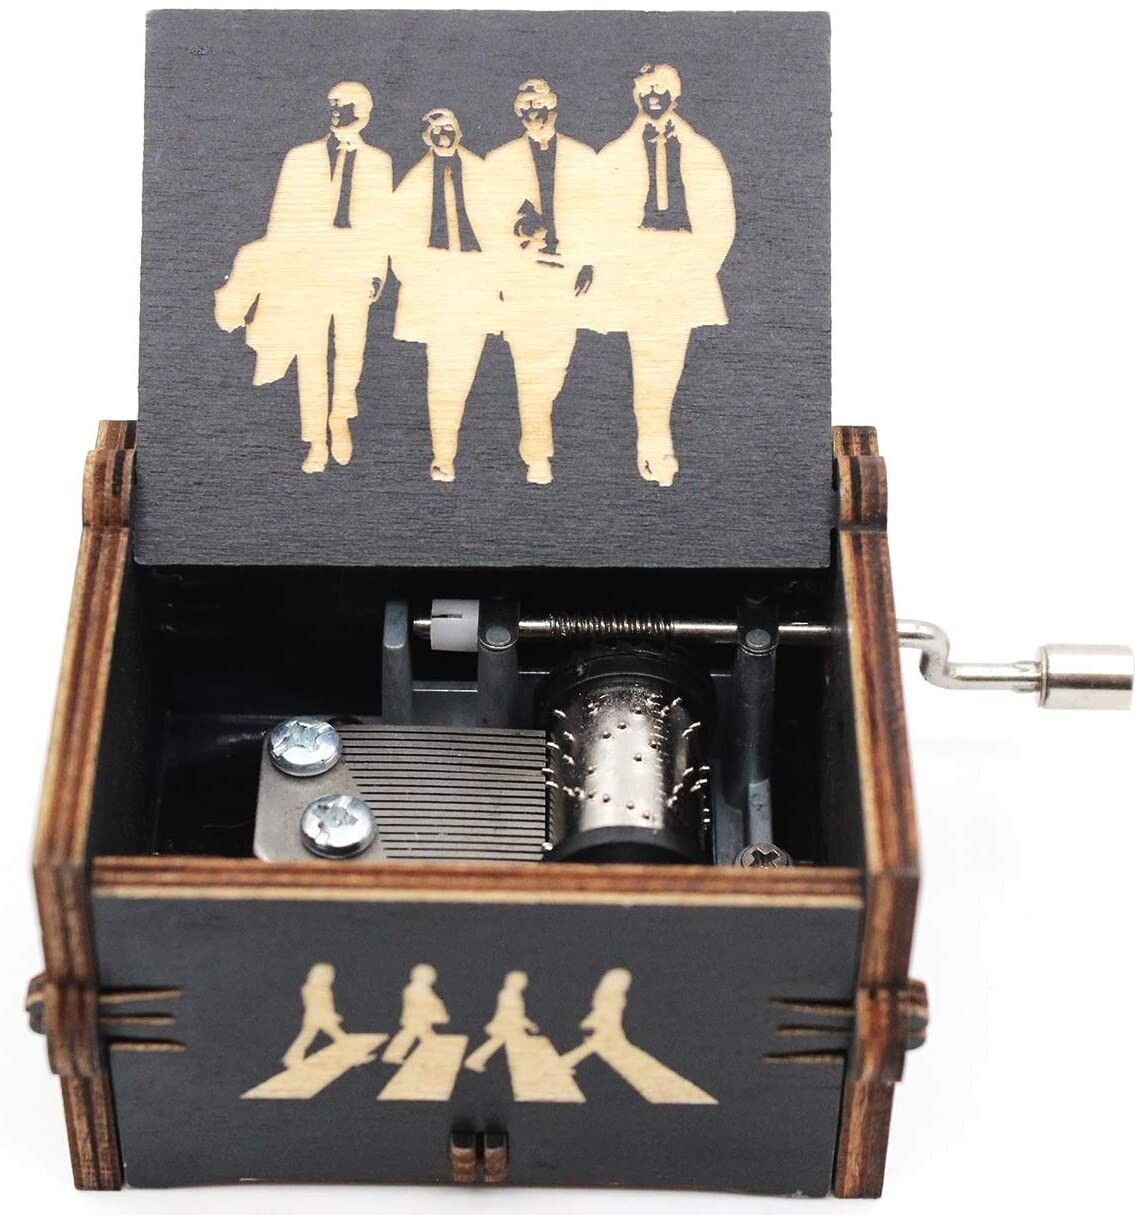 The Beatles Music box Hand Crank Engraved Wood Musical Box, Plays Let it Be